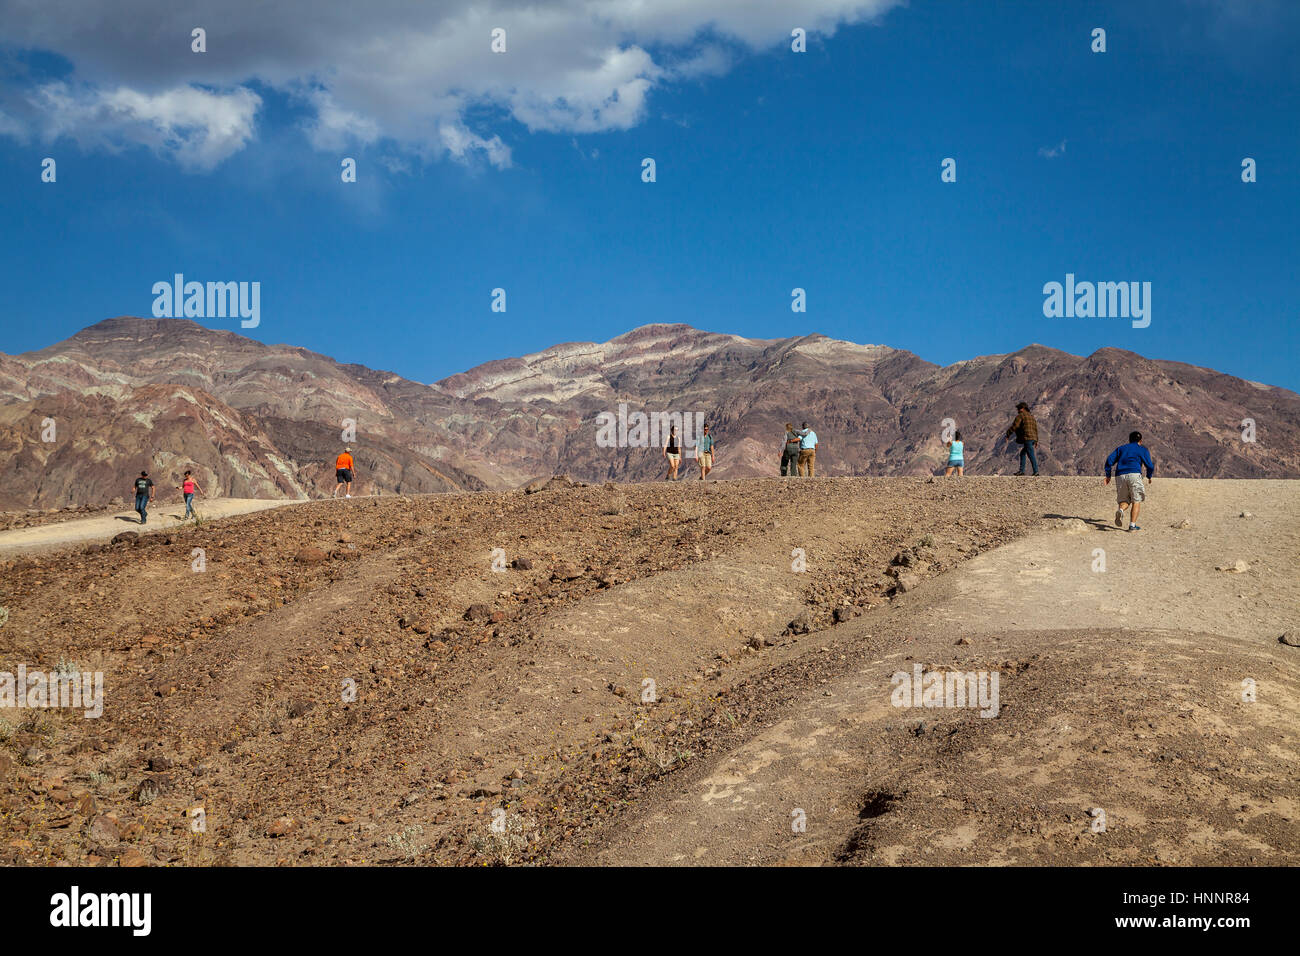 Tourists hiking on a trail in the Death Valley National Park, California, USA Stock Photo